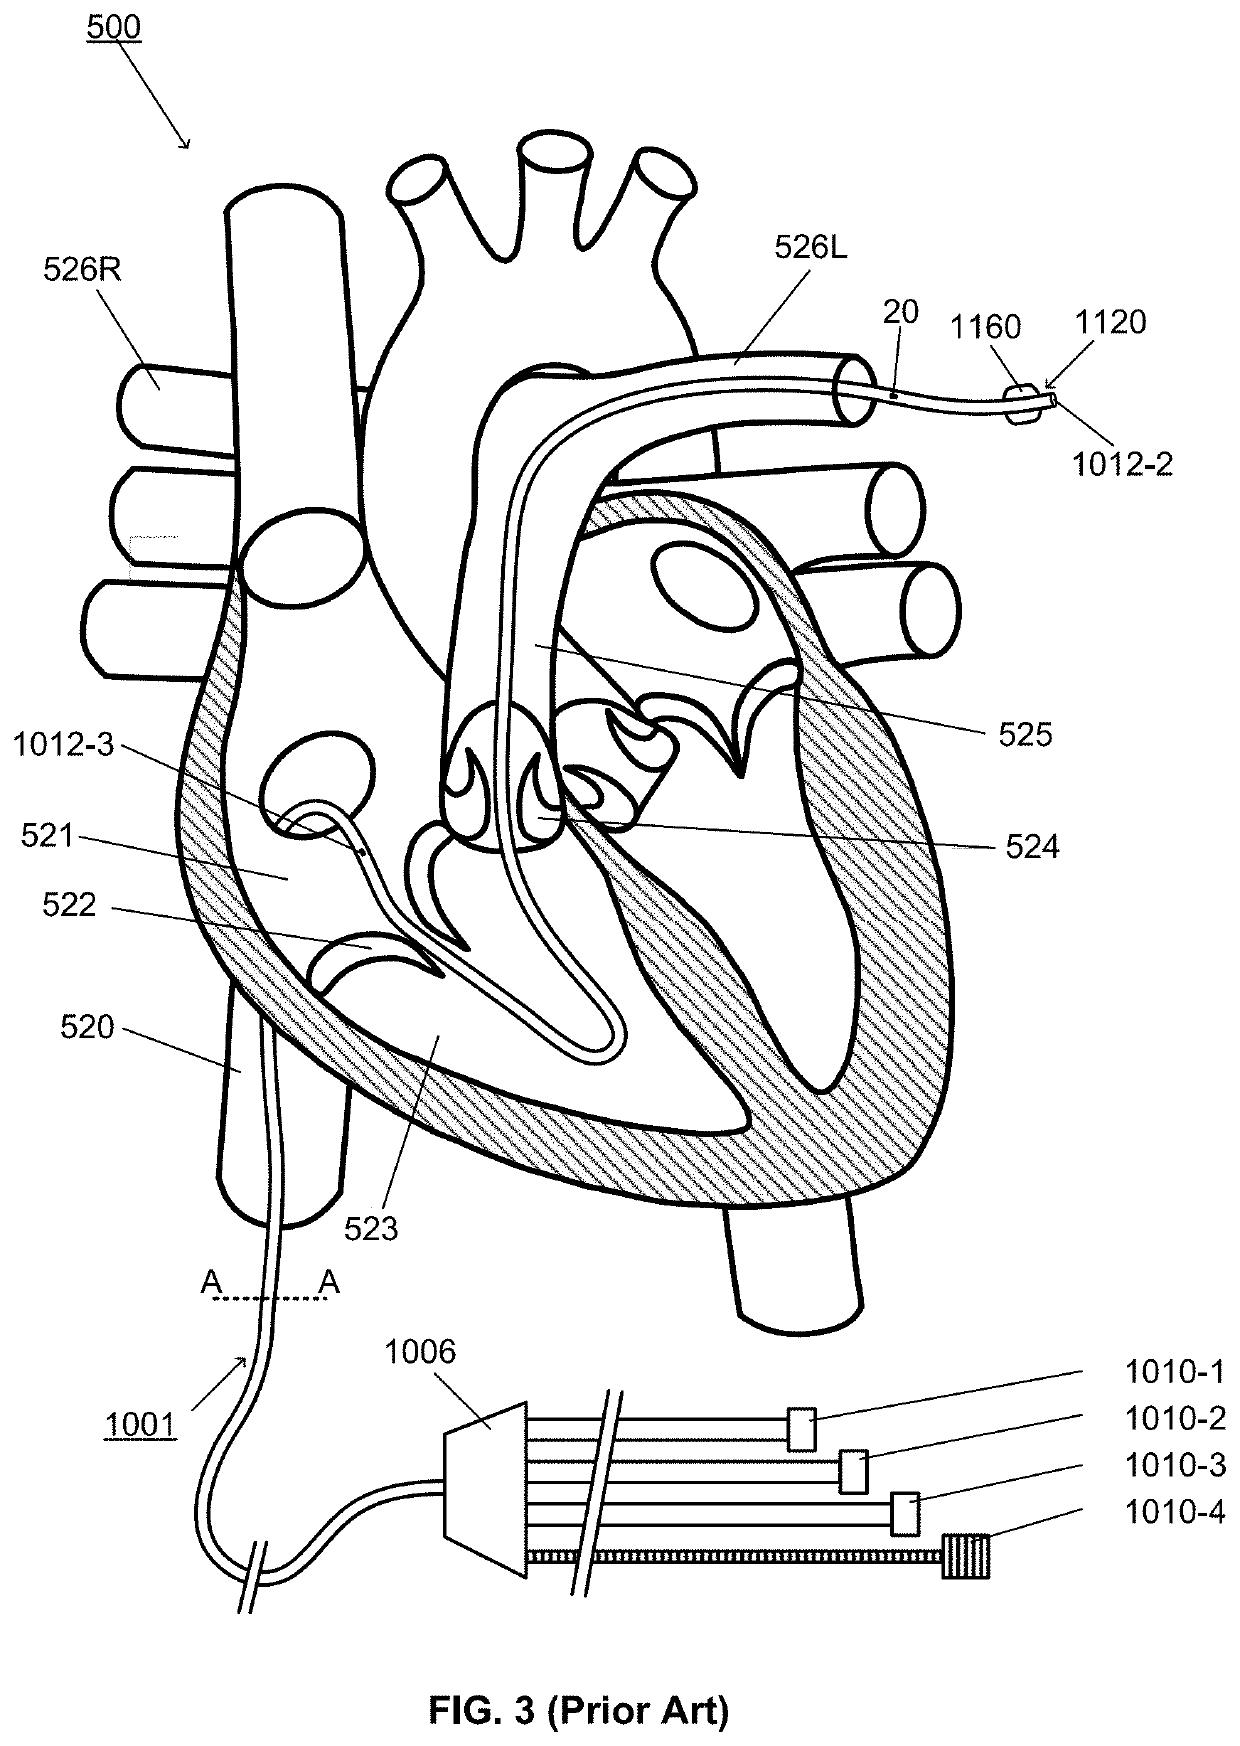 System and apparatus comprising a multi-sensor catheter for right heart and pulmonary artery catheterization